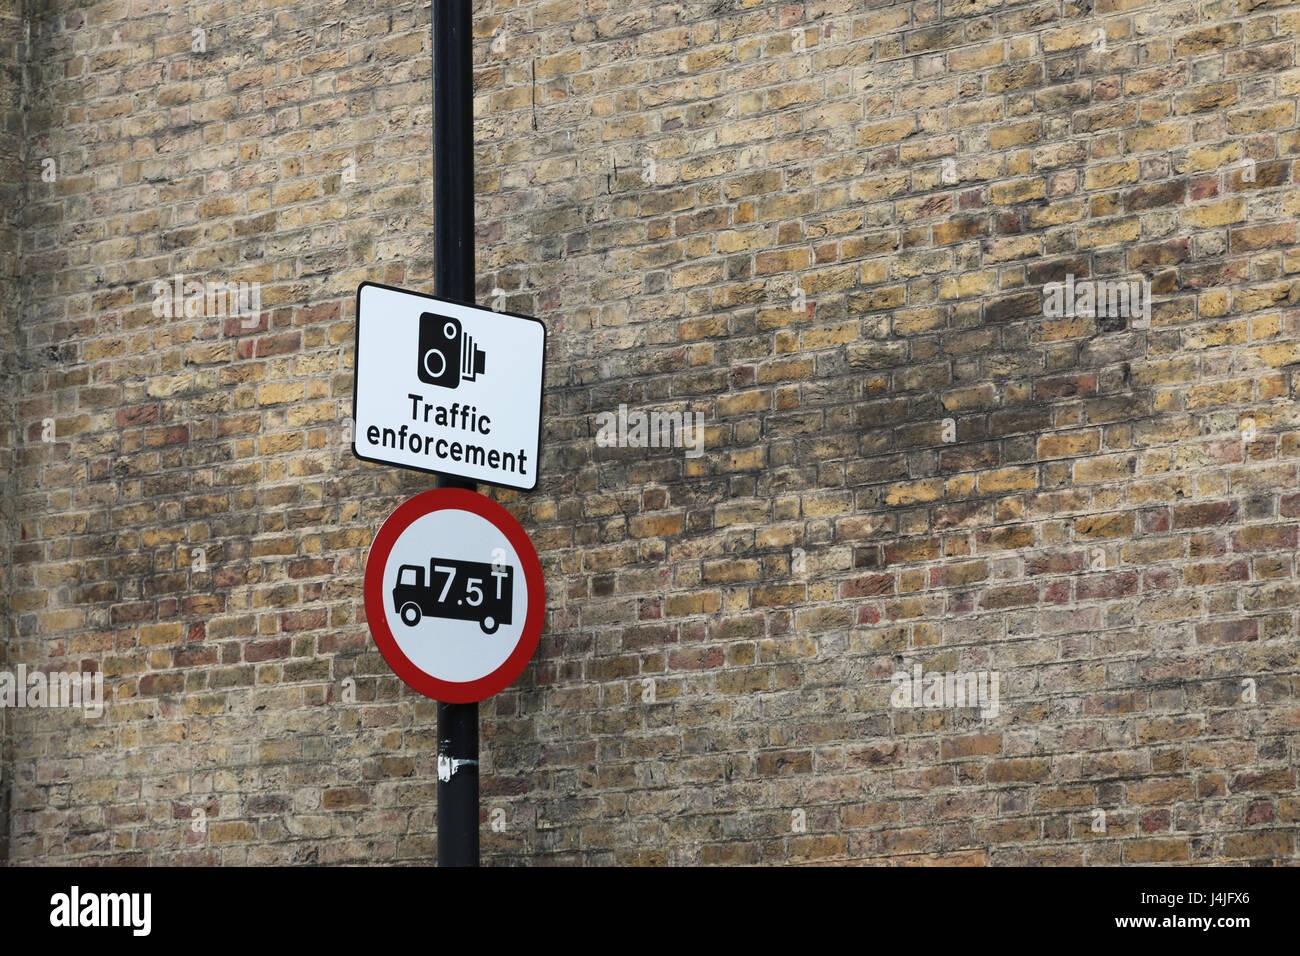 Traffic enforcement and weight limit sign against brick wall Stock Photo